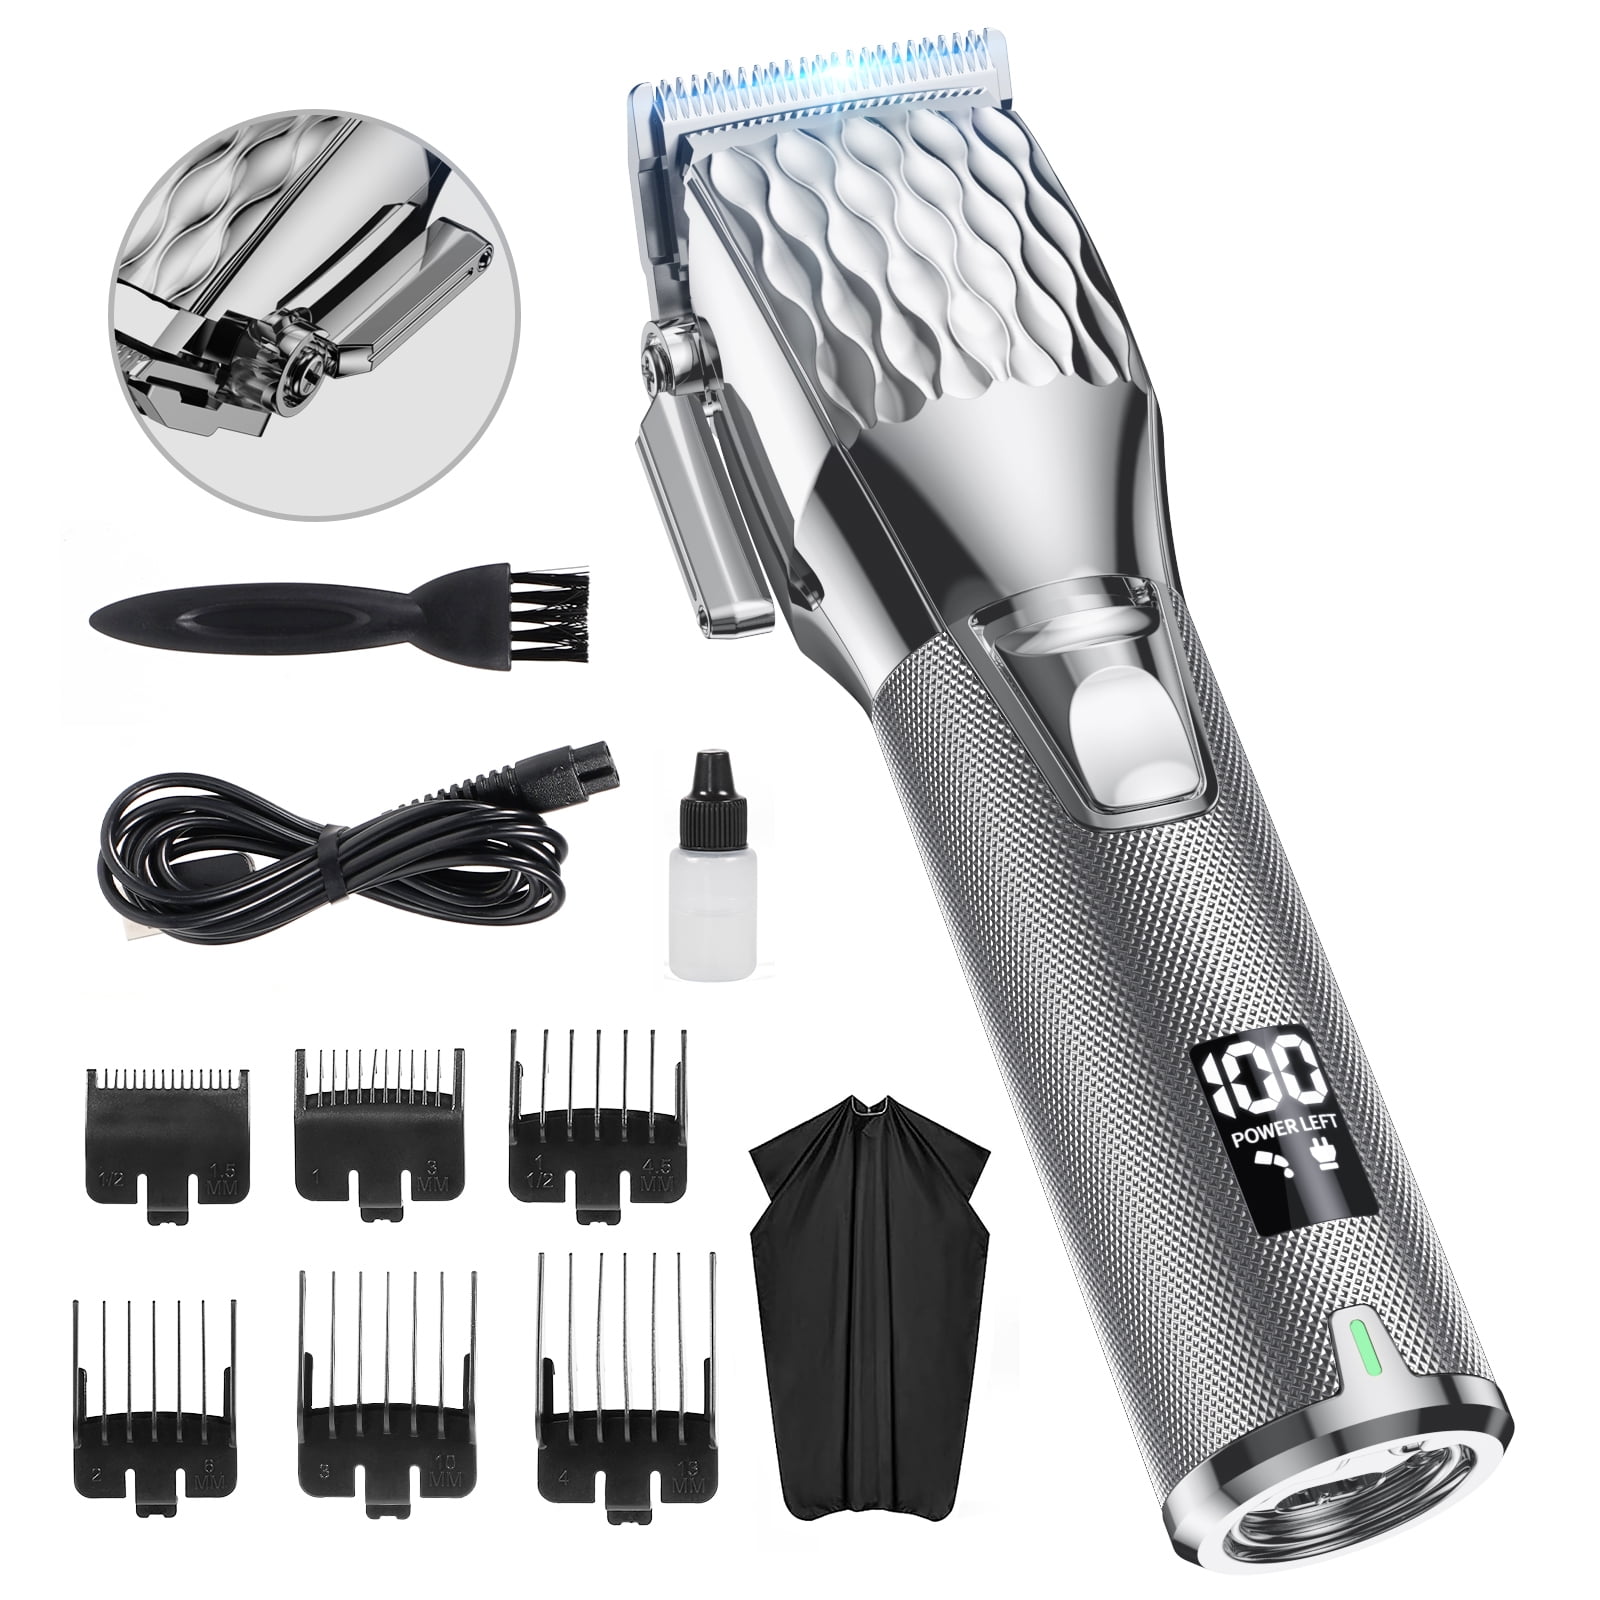 ADANTI Hair Clippers for Men, Electric Hair Beard Trimmer for Men Professional Hair Clipper Rechargeable Metal Handle Face Body Groomer Haircut Machin